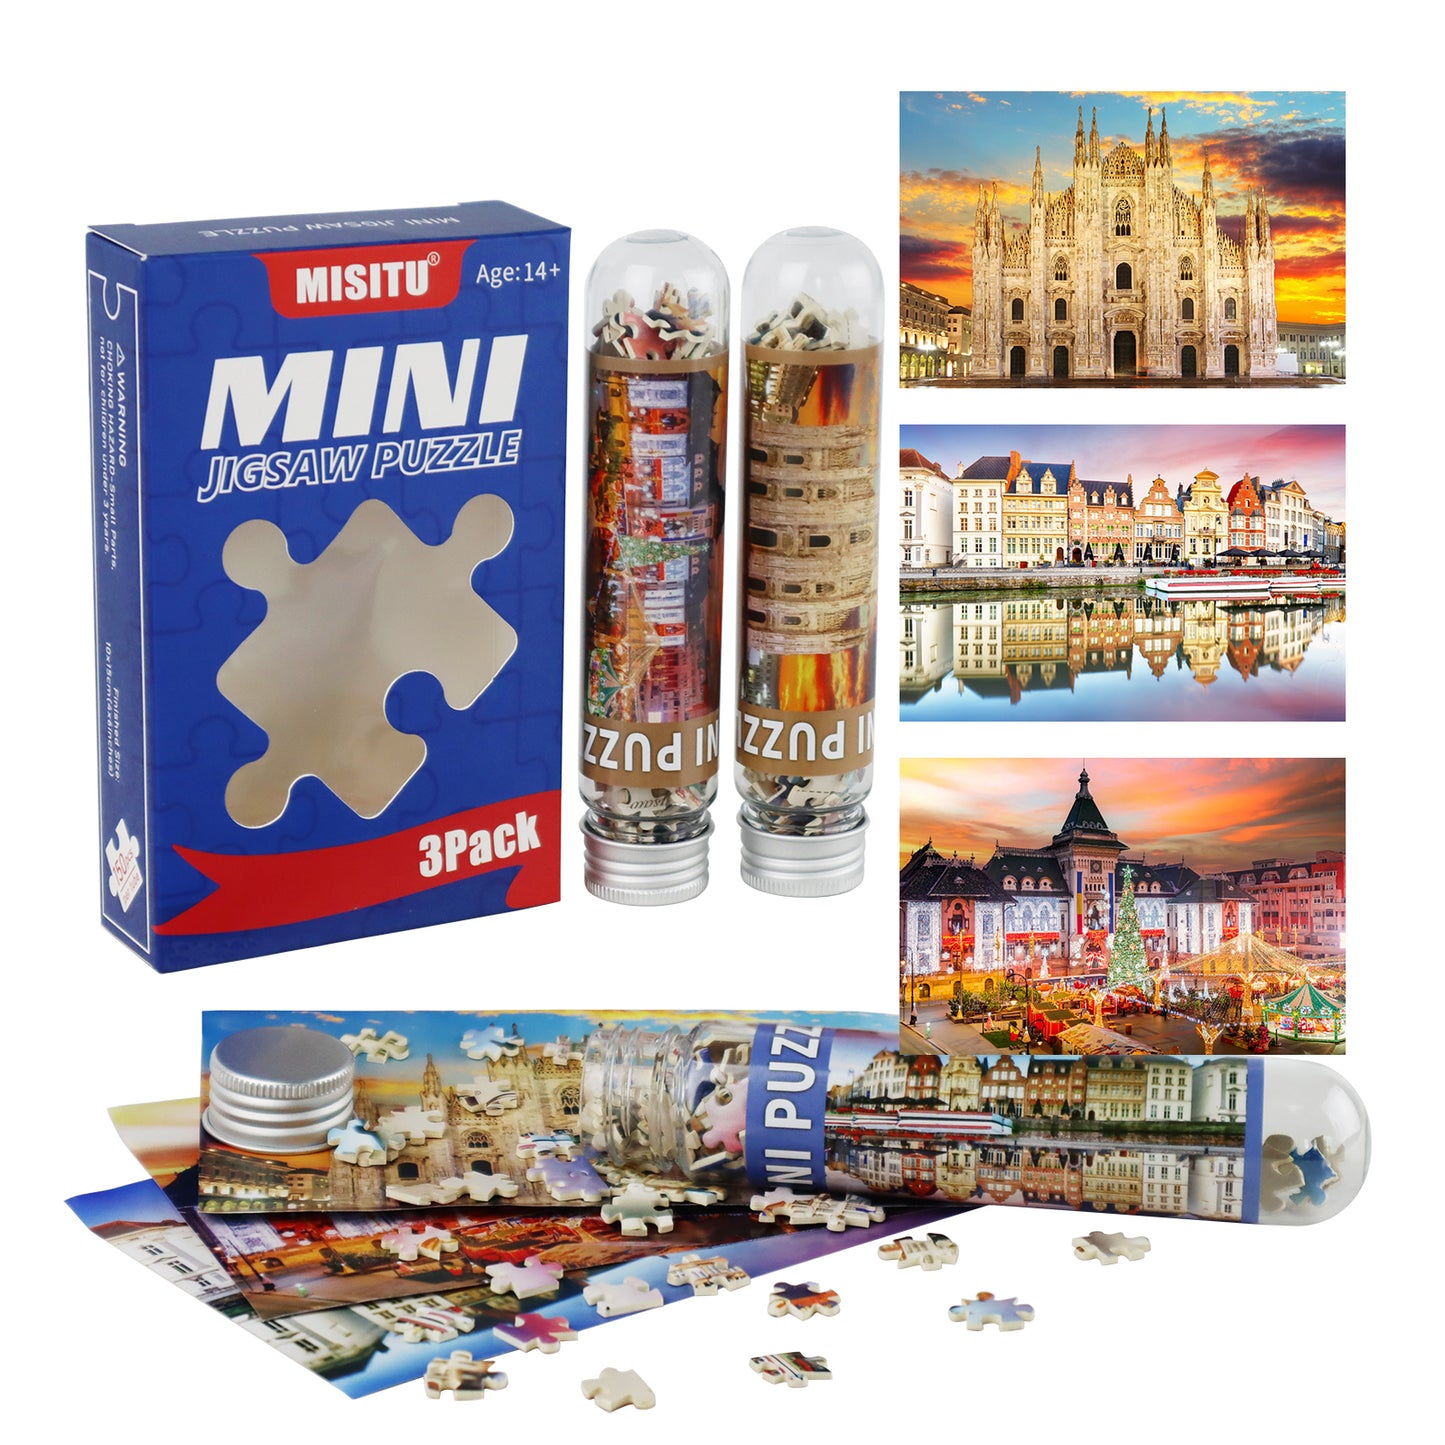 MISITU Mini Puzzle - Milan Cathedral - 3 Pack of 150 Pieces Puzzles for Adult 6 x 4 Inches